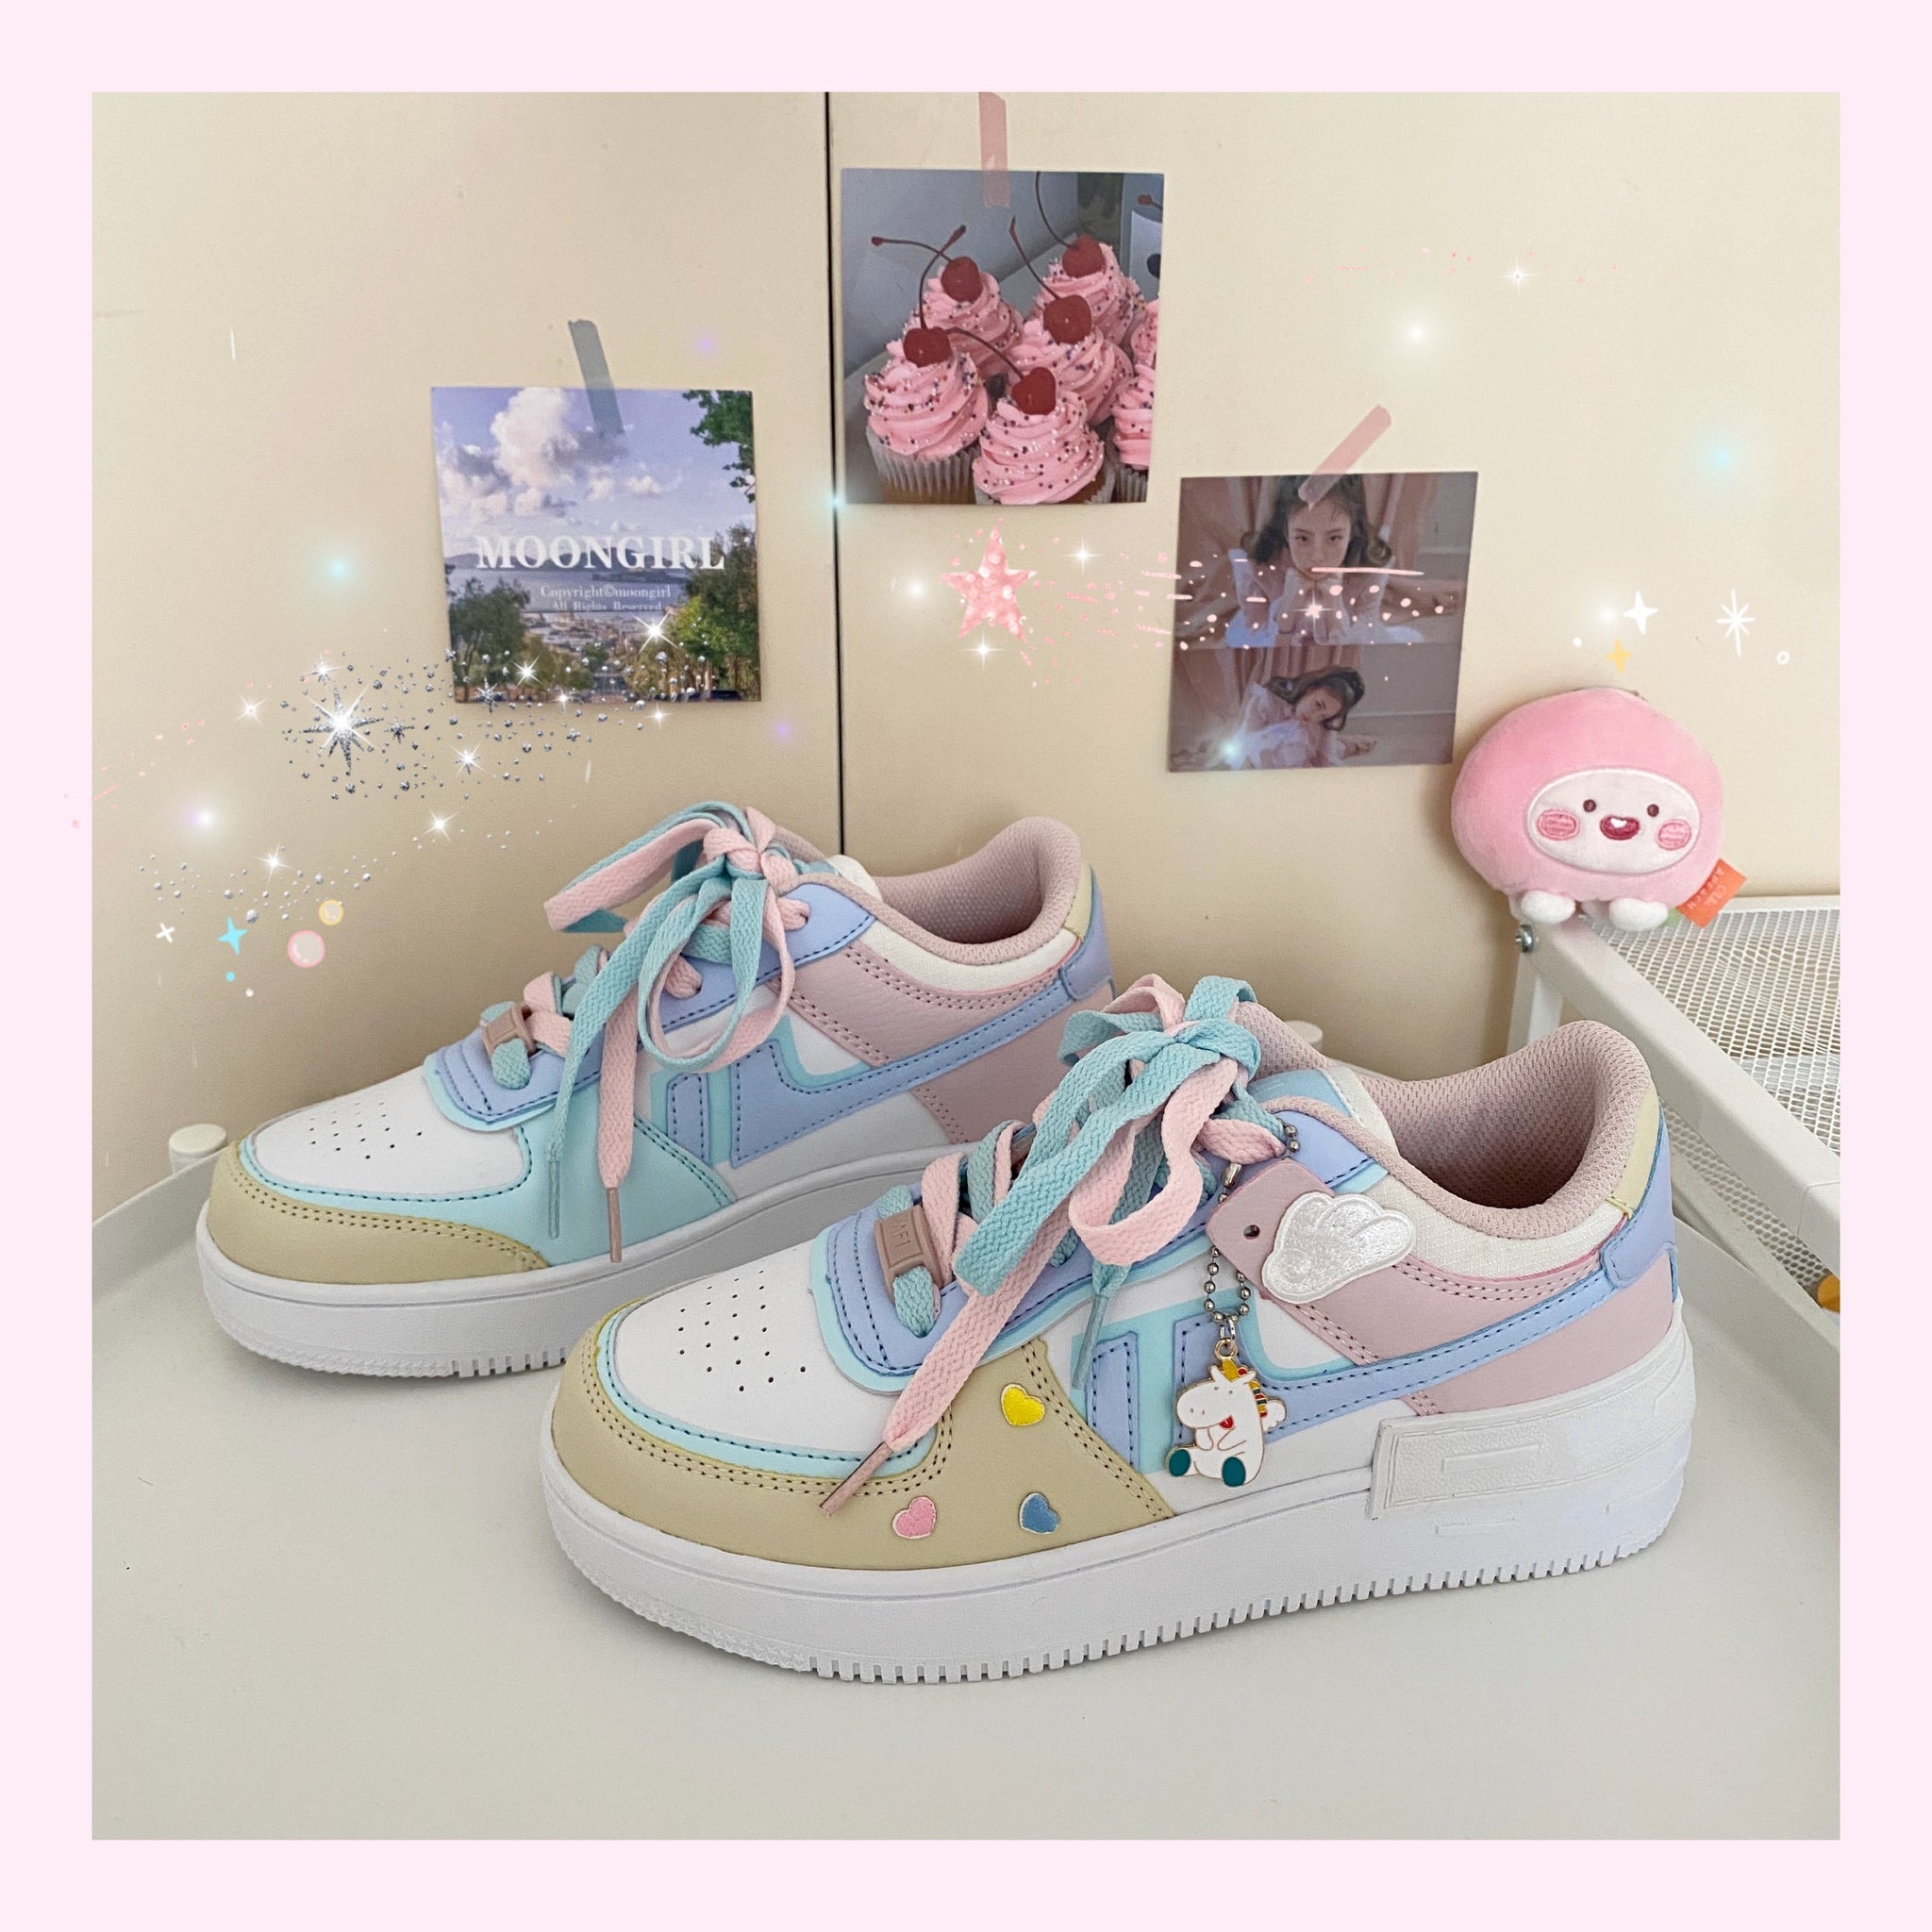 itGirl Shop SOFT GIRL AESTHETIC CUTE PASTEL PATCHES SNEAKERS